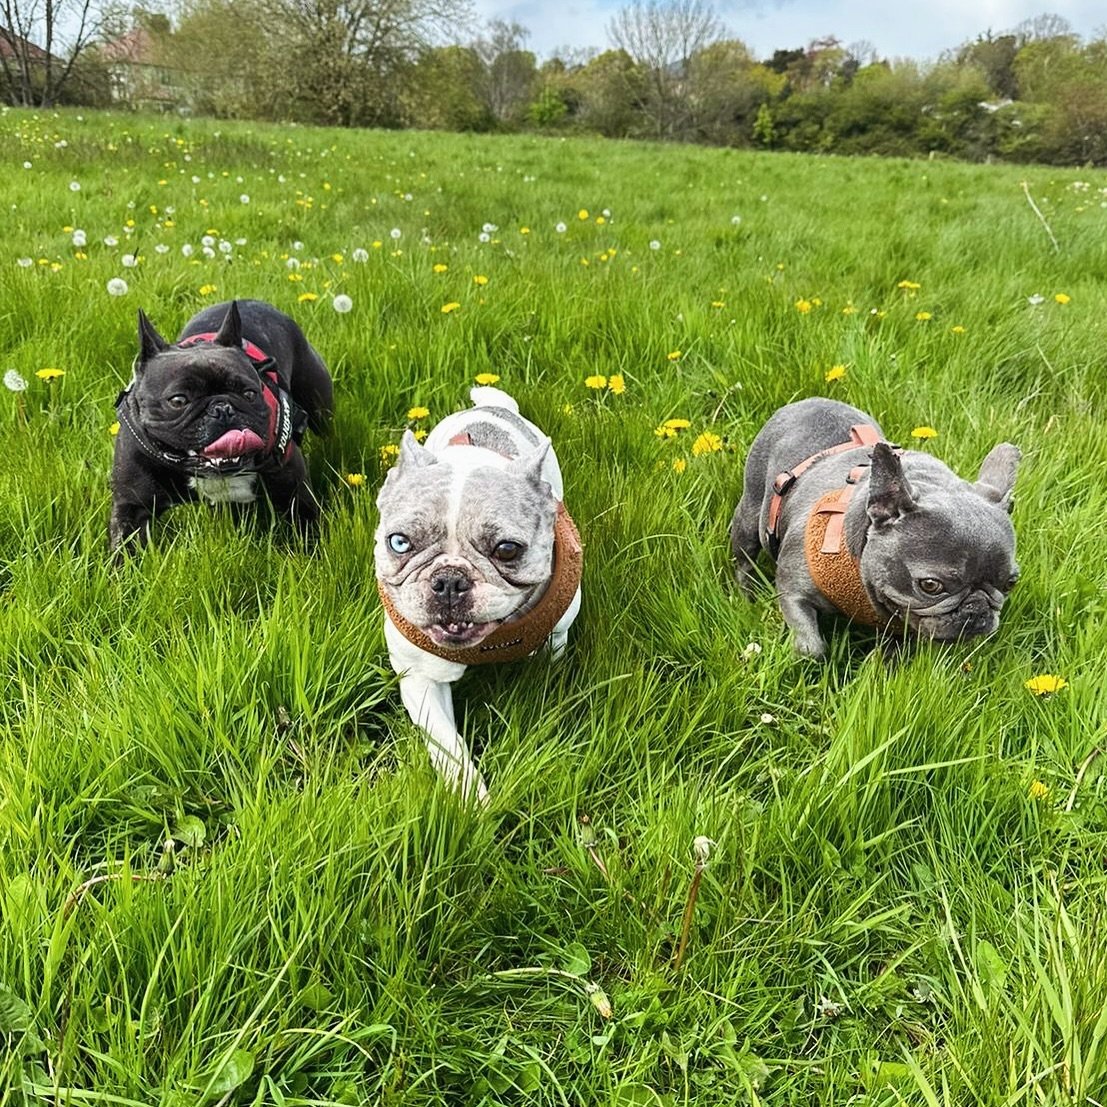 Happy Frenchie Friday 💃🙌🏻 the start of a bank holiday weekend!! What will you be doing with your extra day off? We&rsquo;re hoping for some chill time in the garden if its sunny 🪴🌷